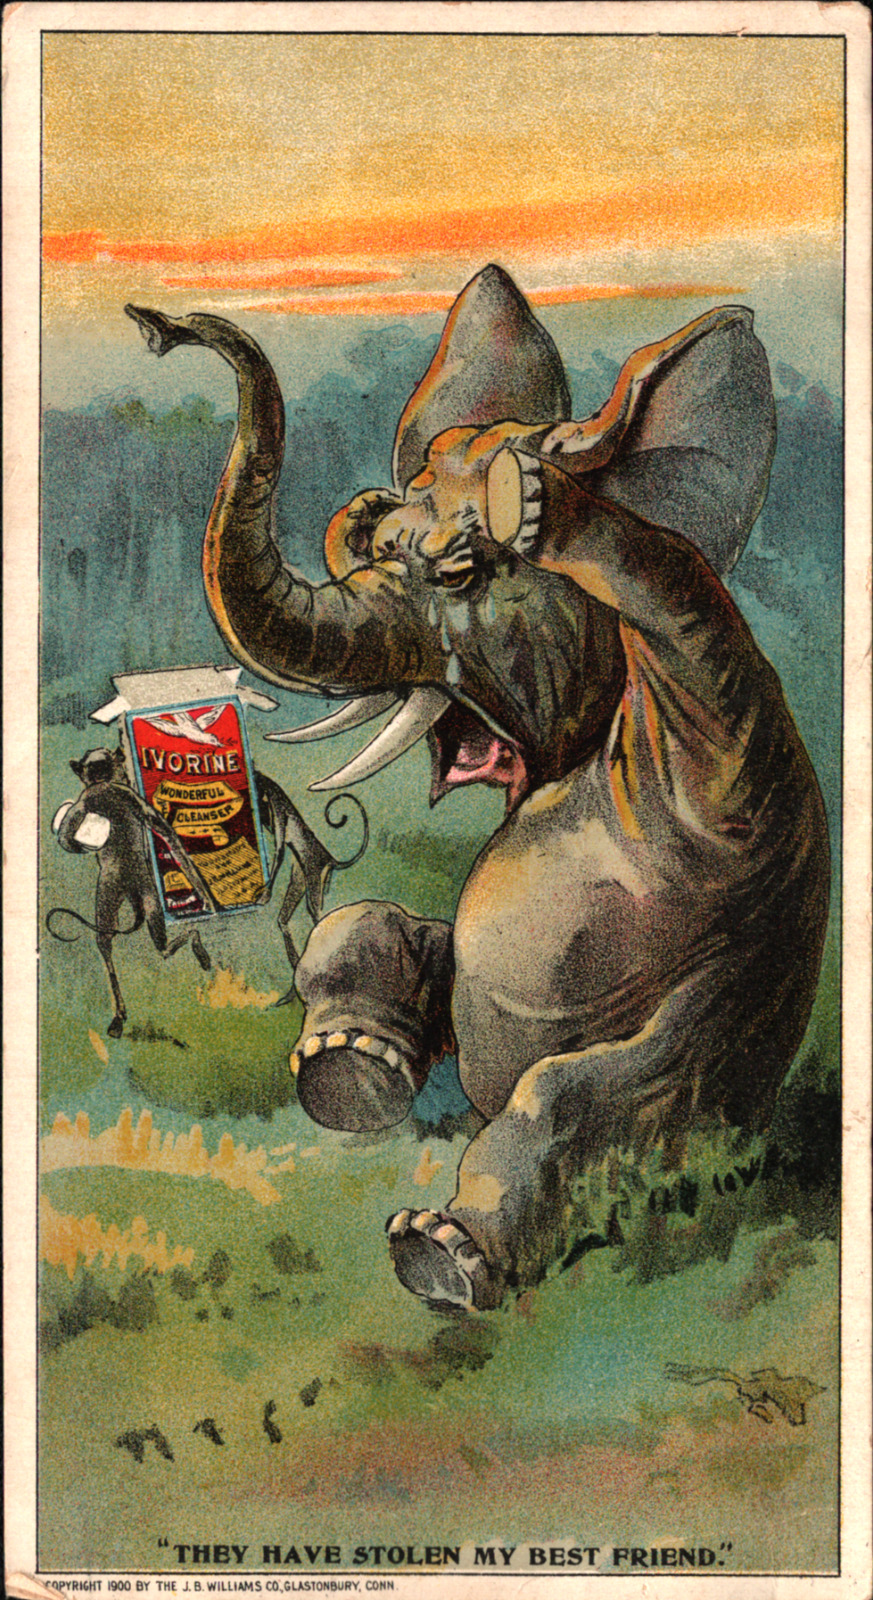 1900 Ivorine Soap Trade Card Crying Elephant Monkeys Steal His Best Friend